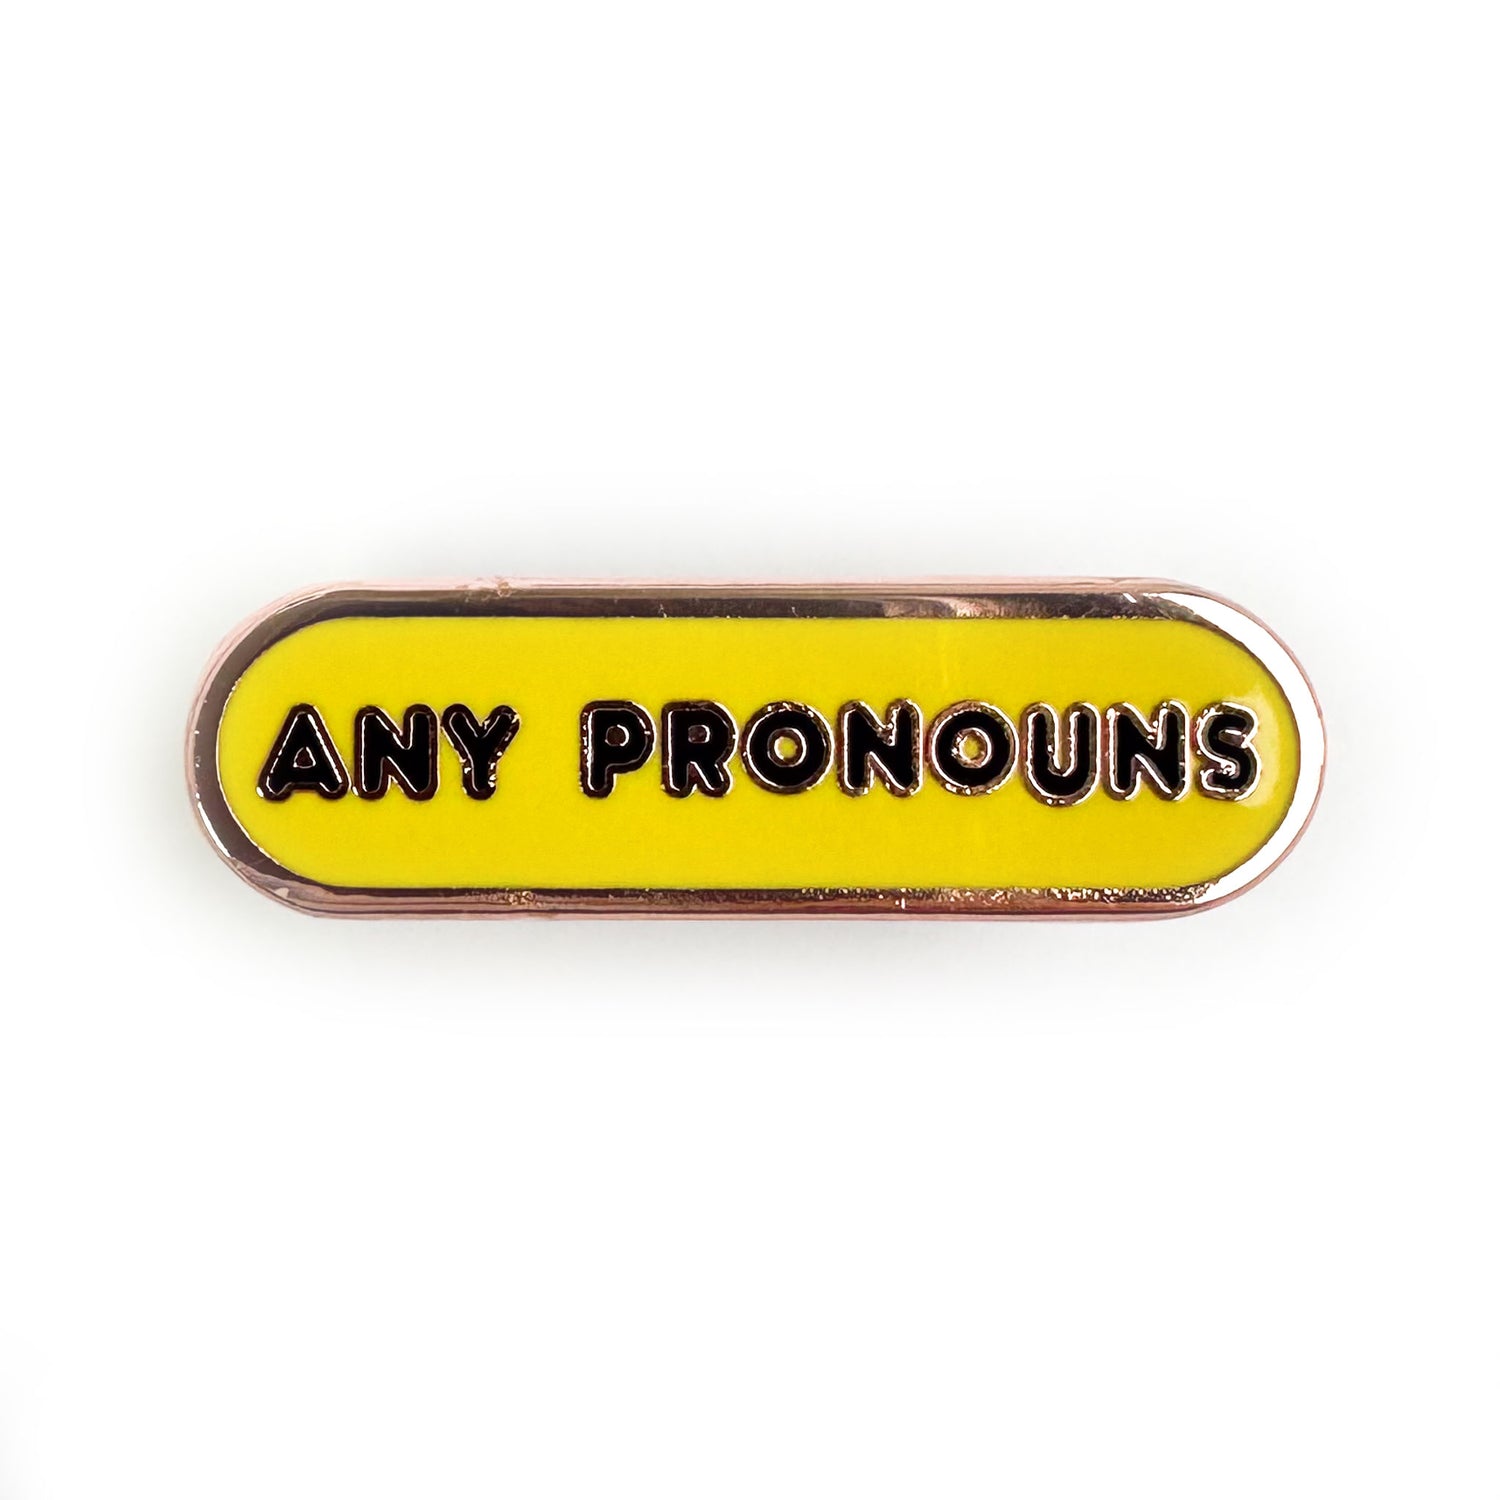 A bandaid shaped pin that is yellow with black words on it that read "Any Pronouns" 